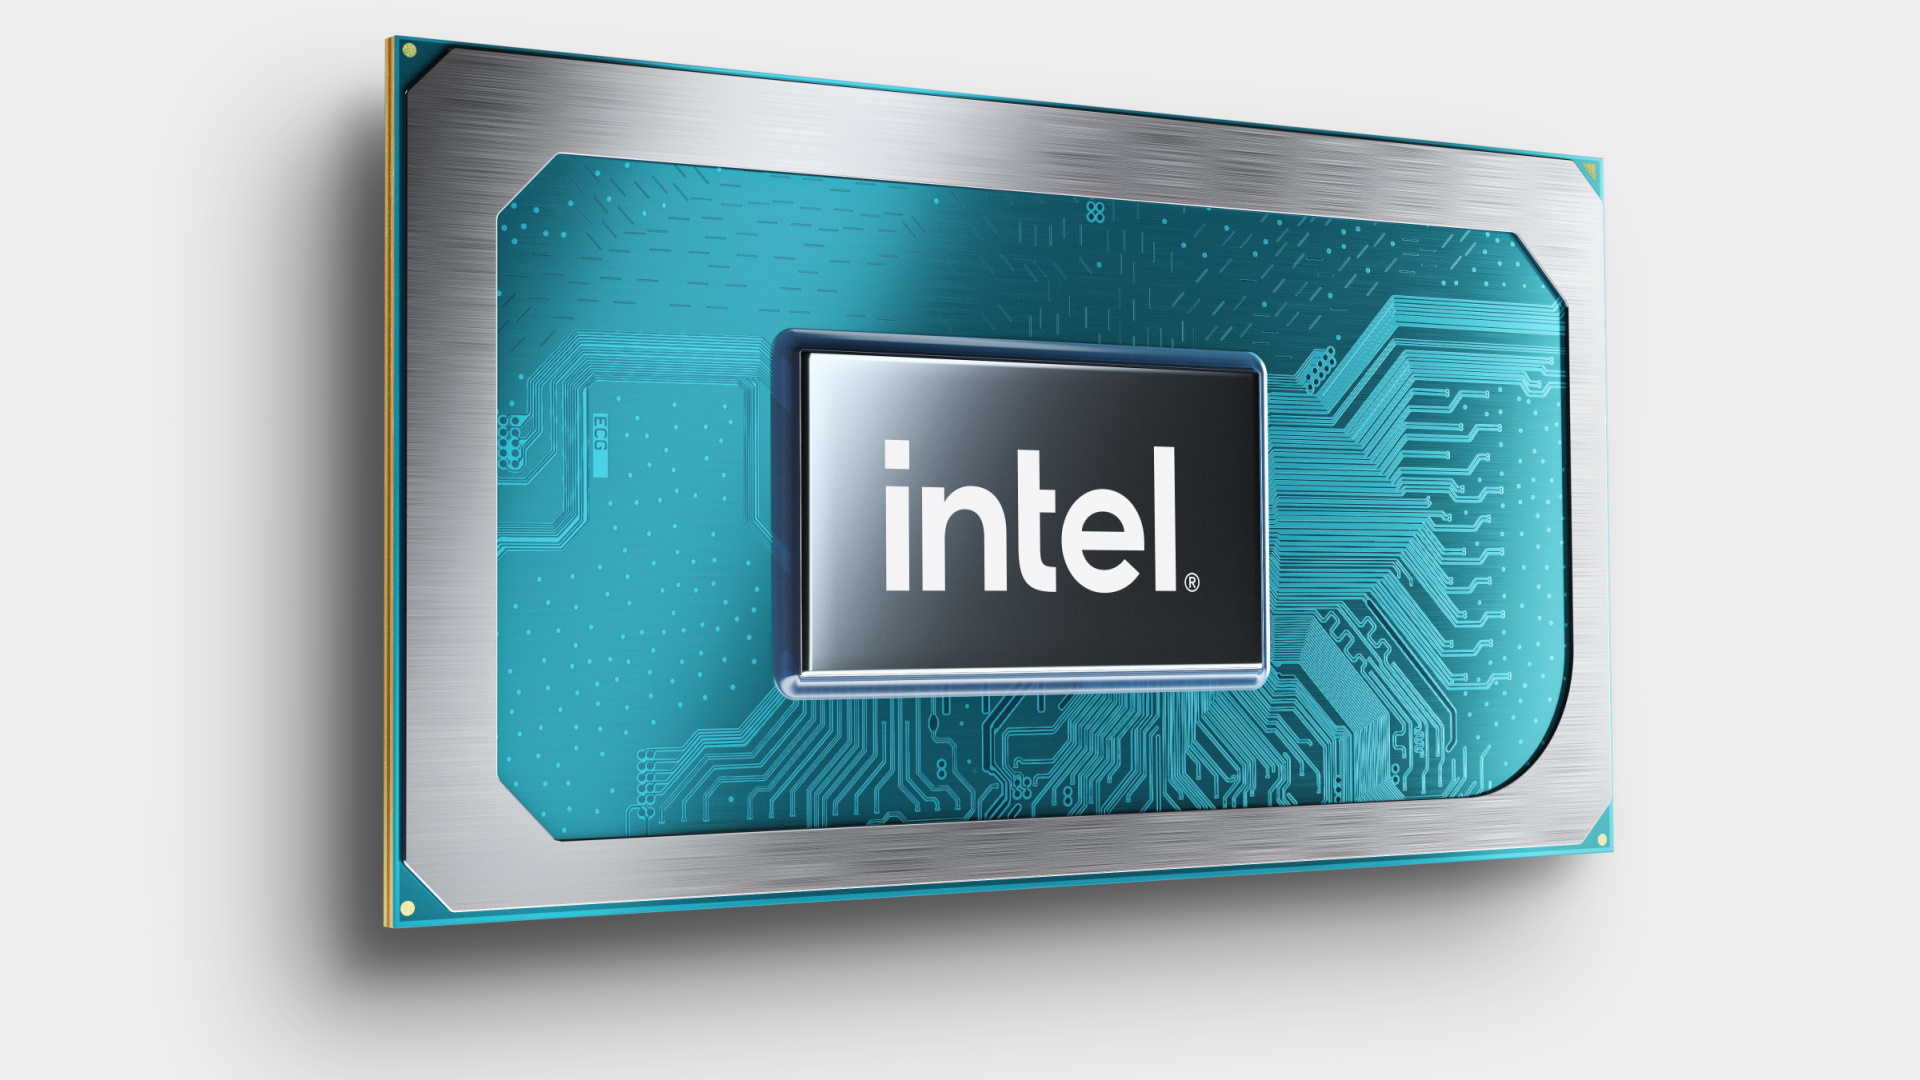  Intel pumps 1 million laptop chips into the market with the release of Tiger Lake-H 